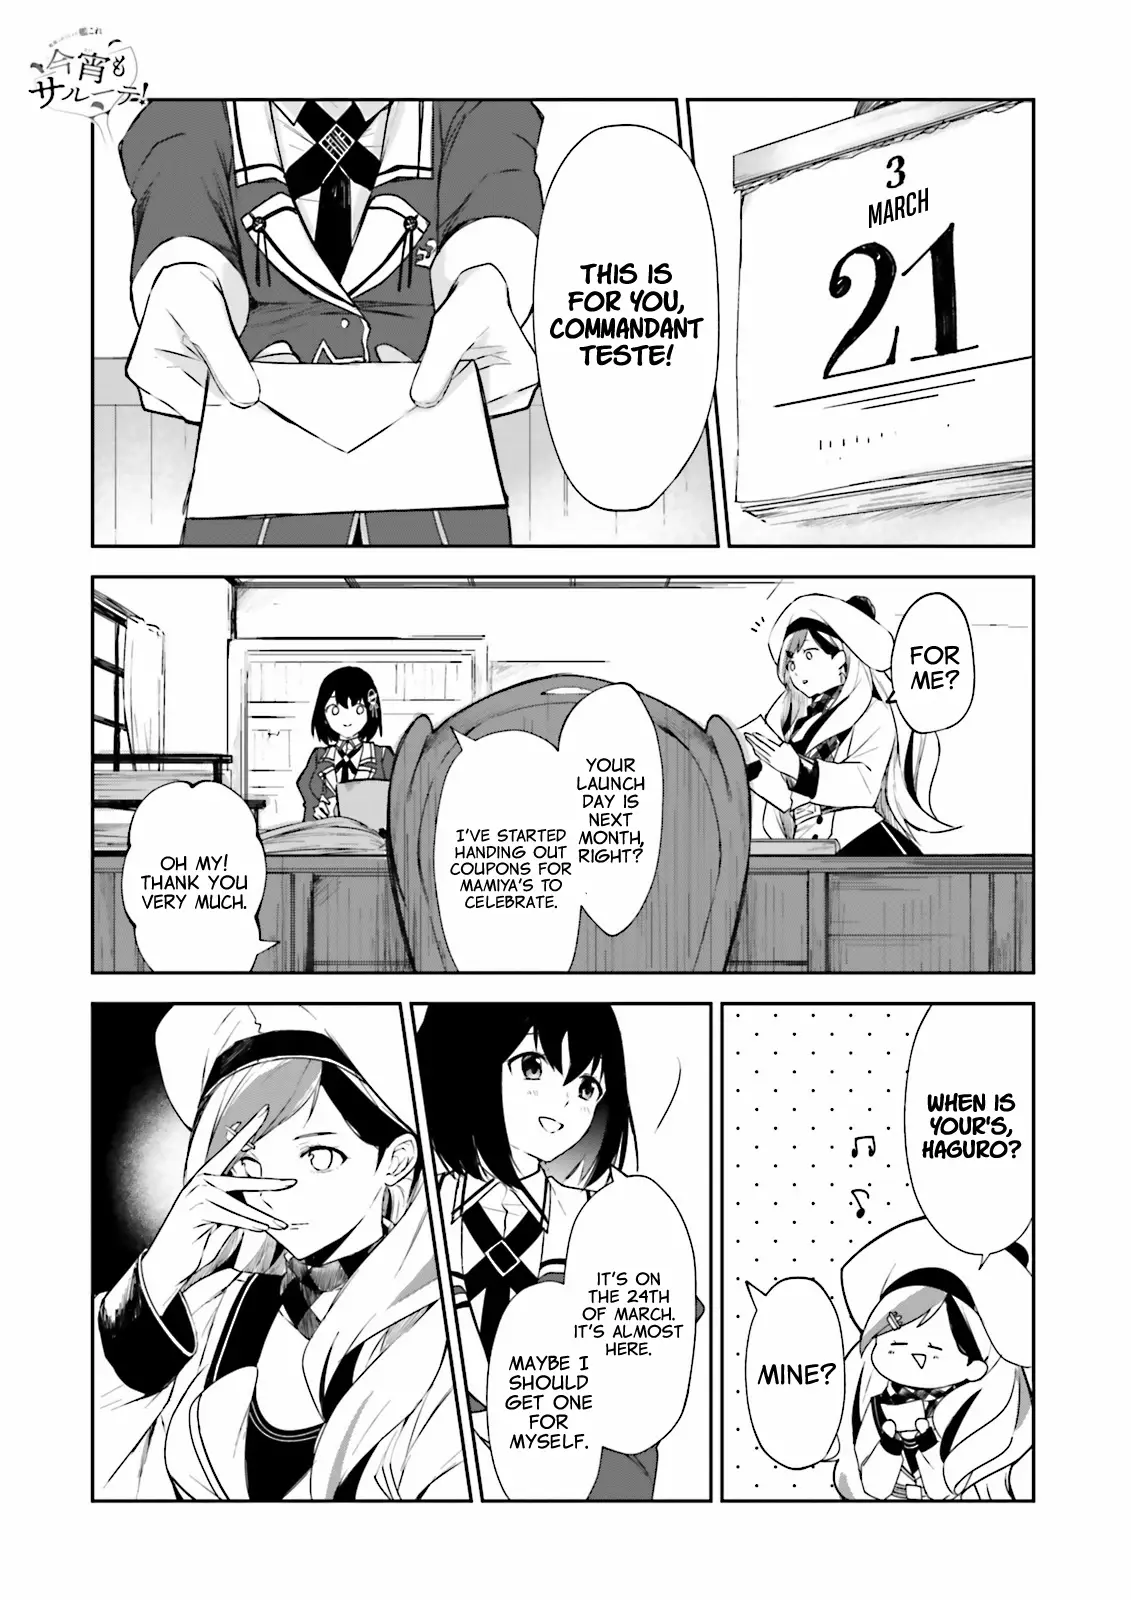 Kantai Collection -Kancolle- Tonight, Another "salute"! - 16 page 1